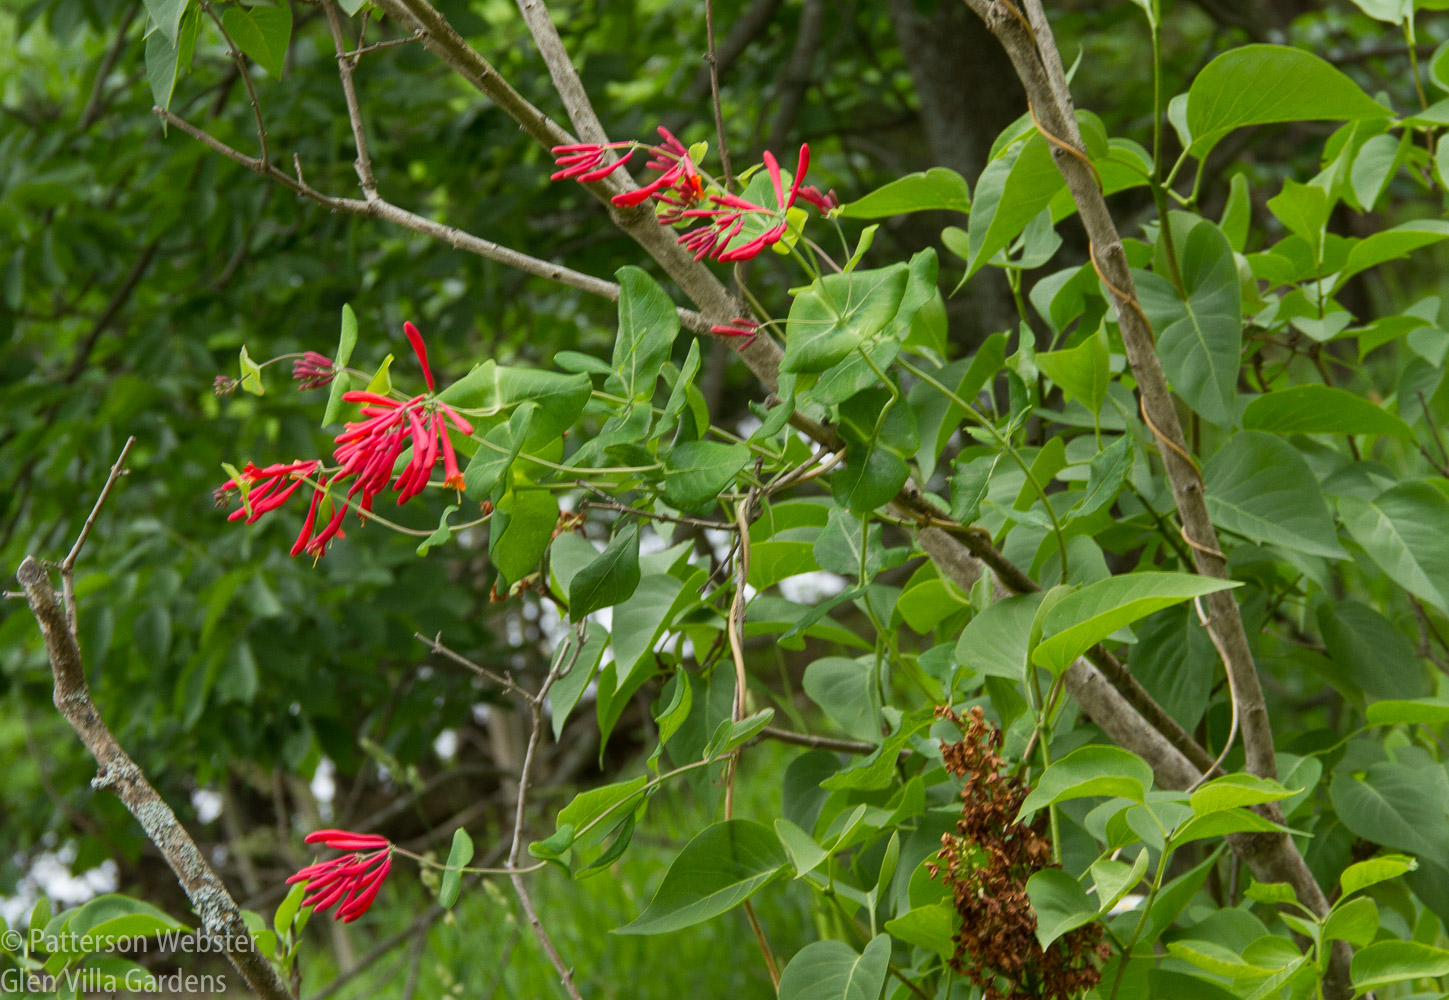 I planted this honeysuckle (Lonicera sempervirens 'Major Wheeler') in 2012. This is the first year it has bloomed well. Is a warmer climate the reason?